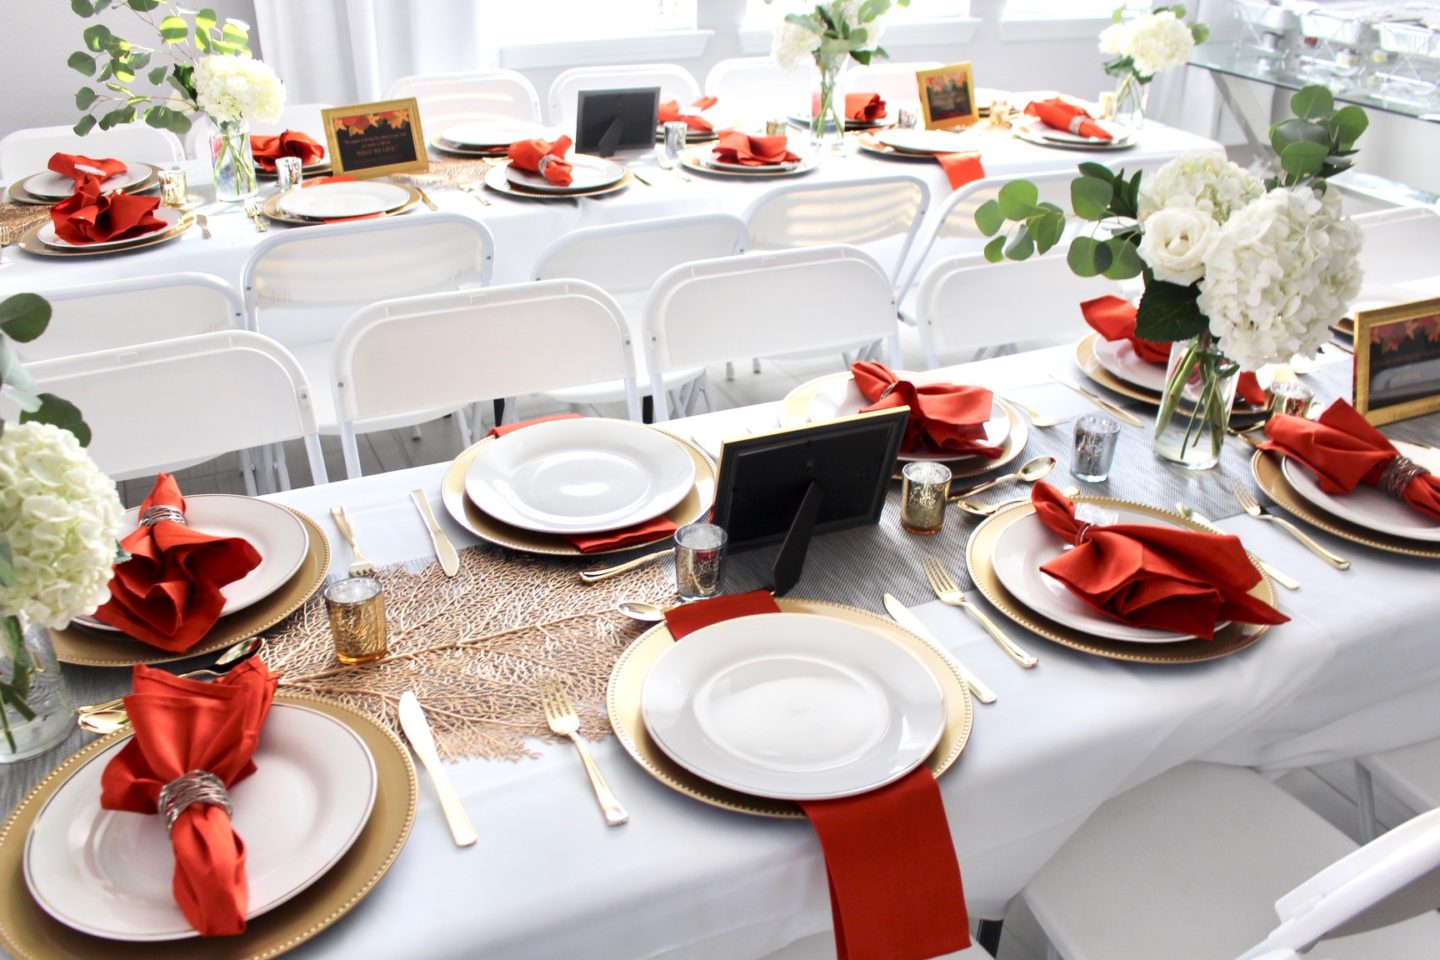 The Agbetola Friendsgiving Details and Decor